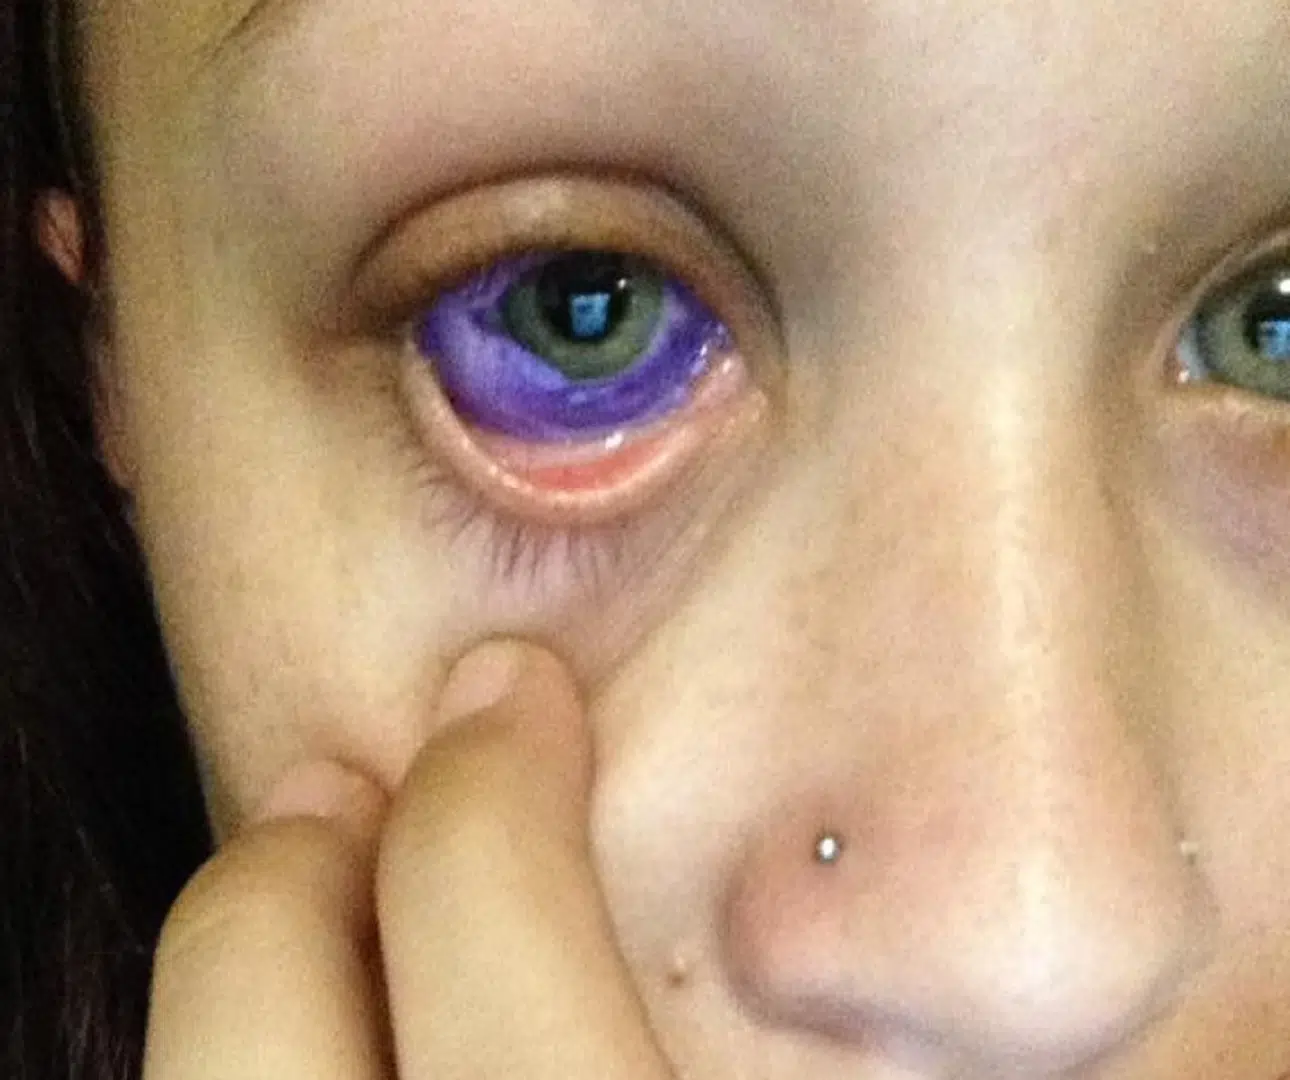 Woman who spent £30k on ink says eyeball tattoos have brought her happiness  | Metro News